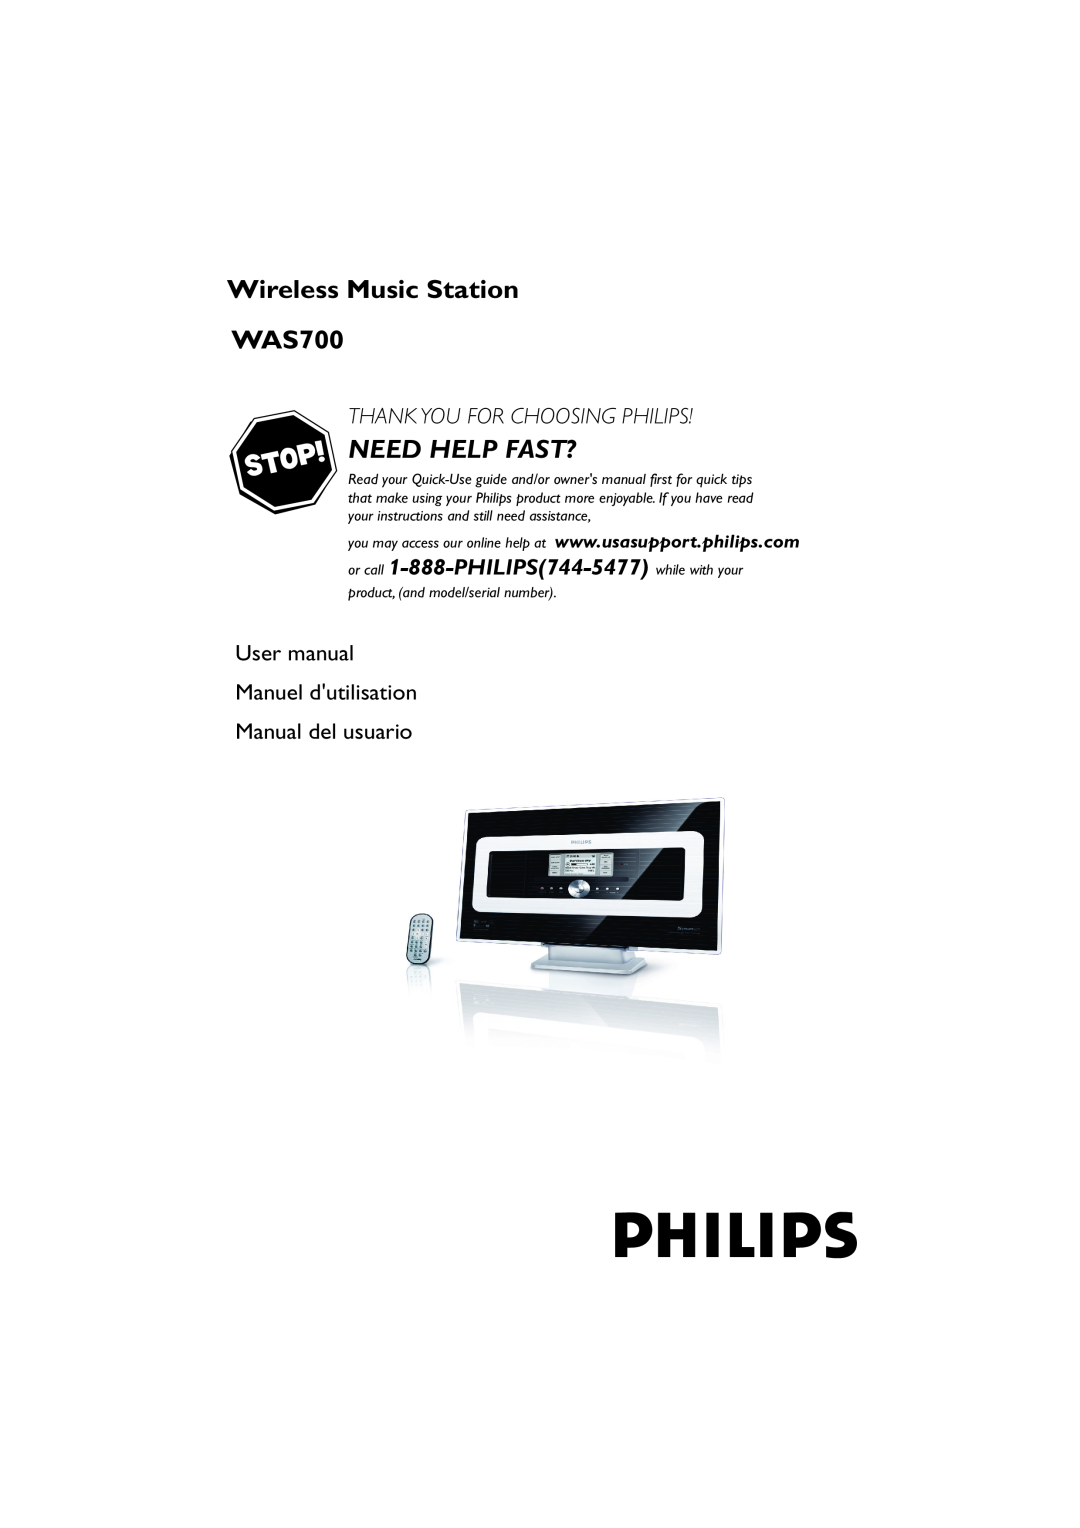 Philips owner manual Wireless Music Station WAS700, Need Help Fast?, Thank You For Choosing Philips, Manual del usuario 